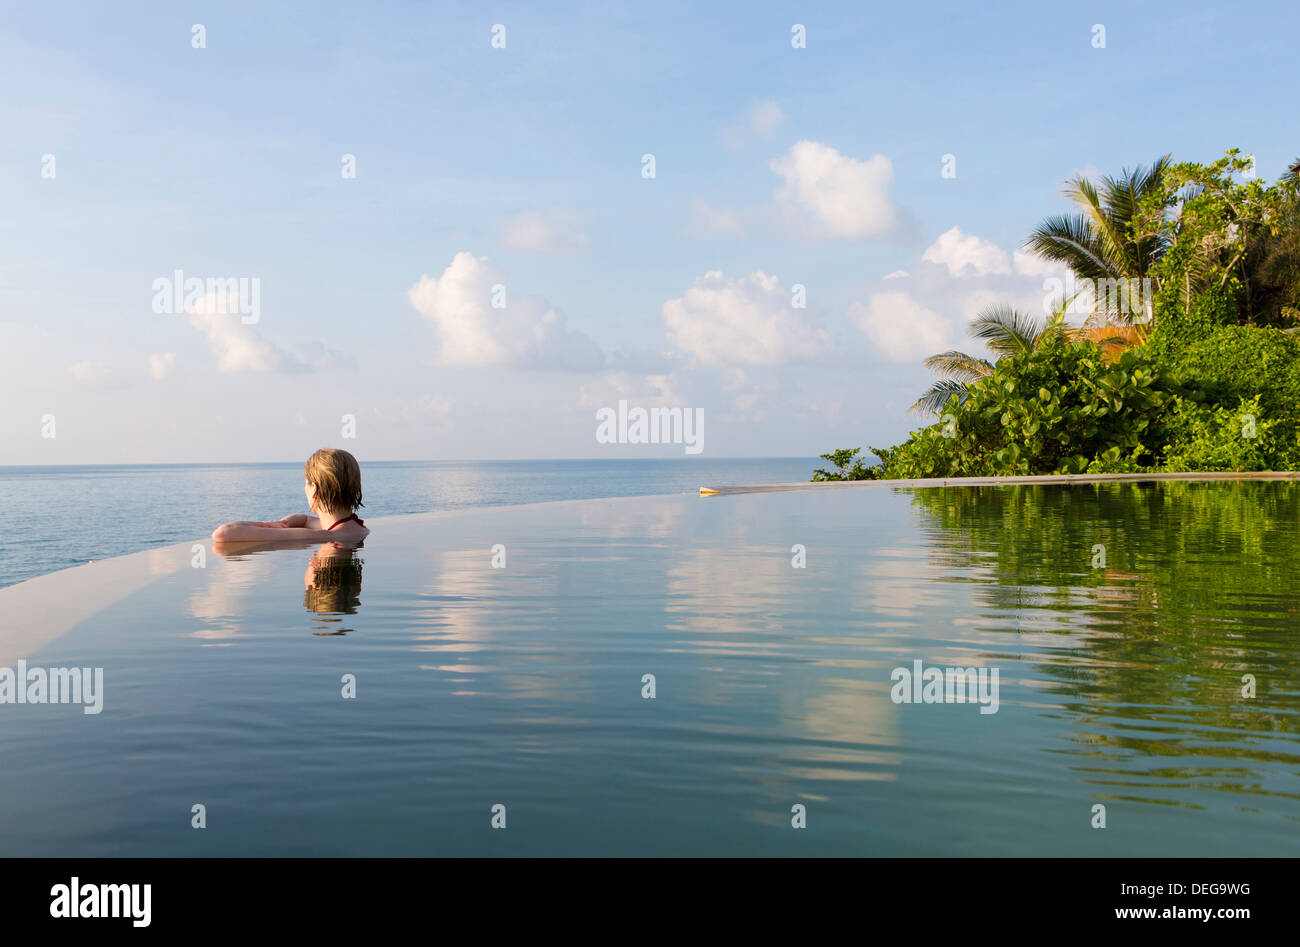 Woman in an infinity pool looking out to sea, Koh Samui, Thailand, Southeast Asia, Asia Stock Photo